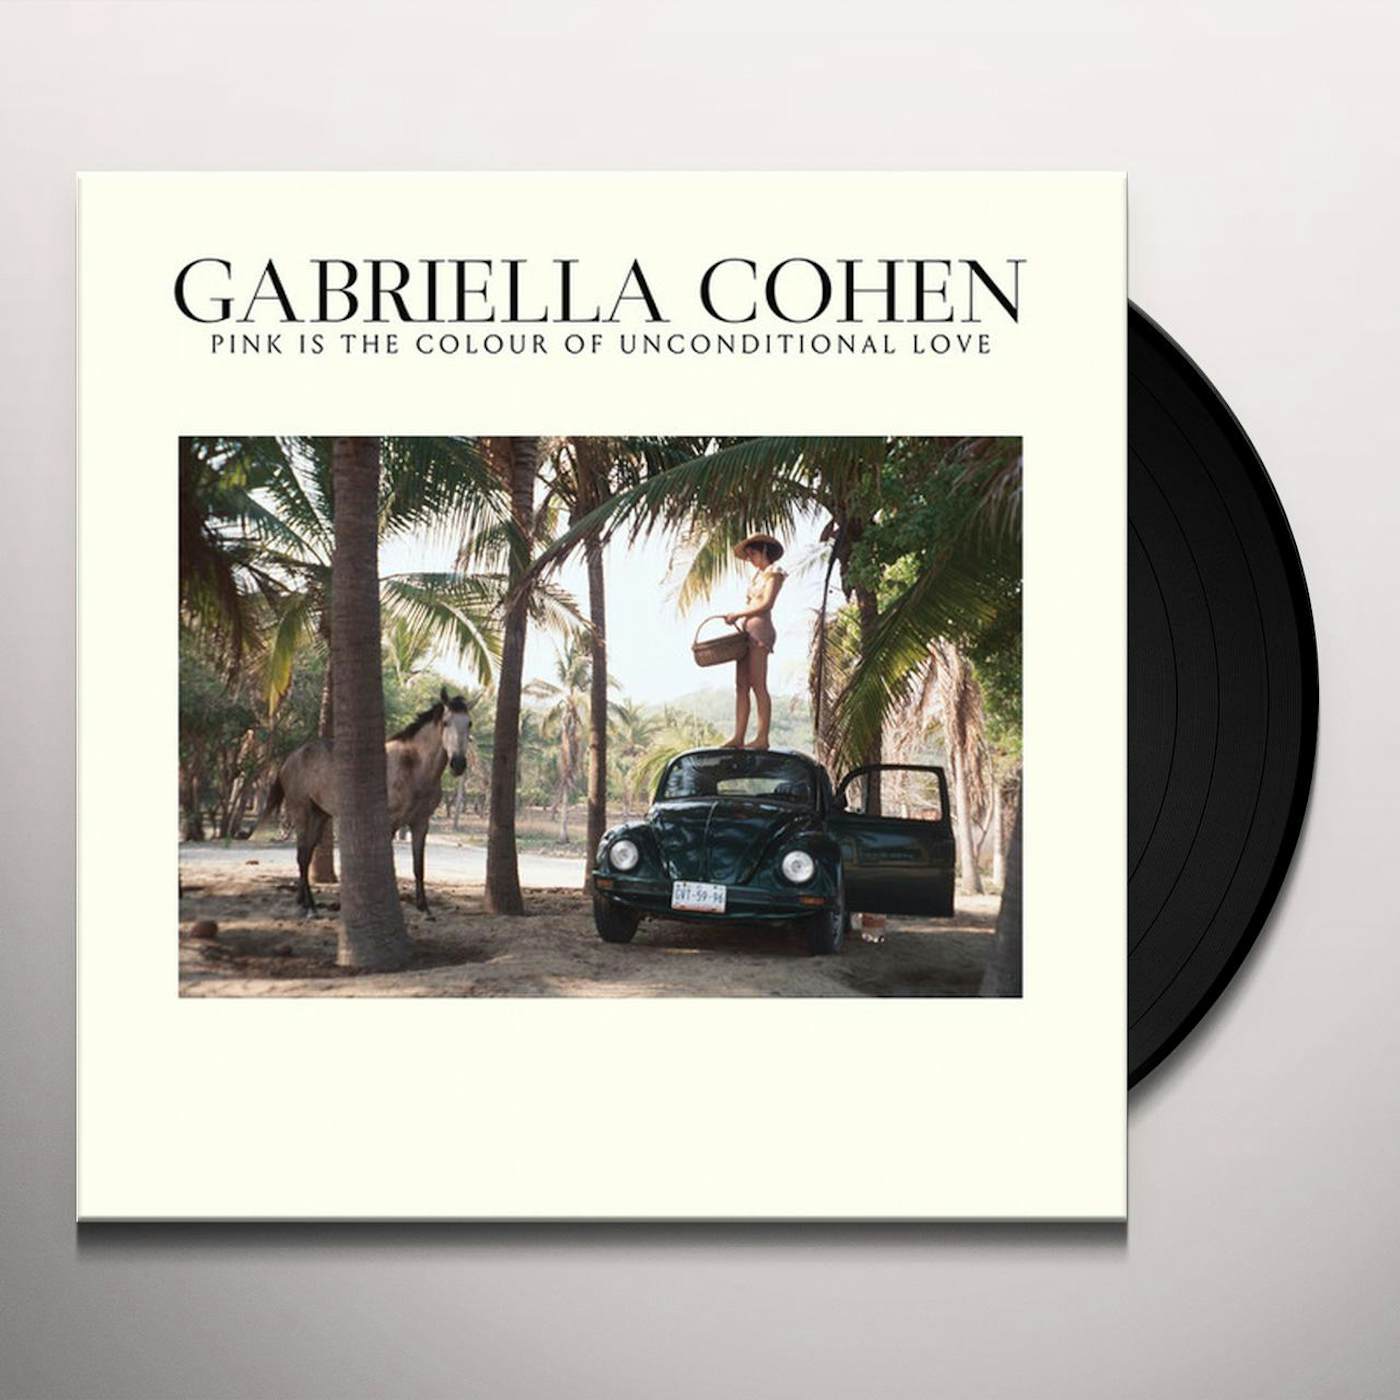 Gabriella Cohen Pink is the Colour of Unconditional Love Vinyl Record